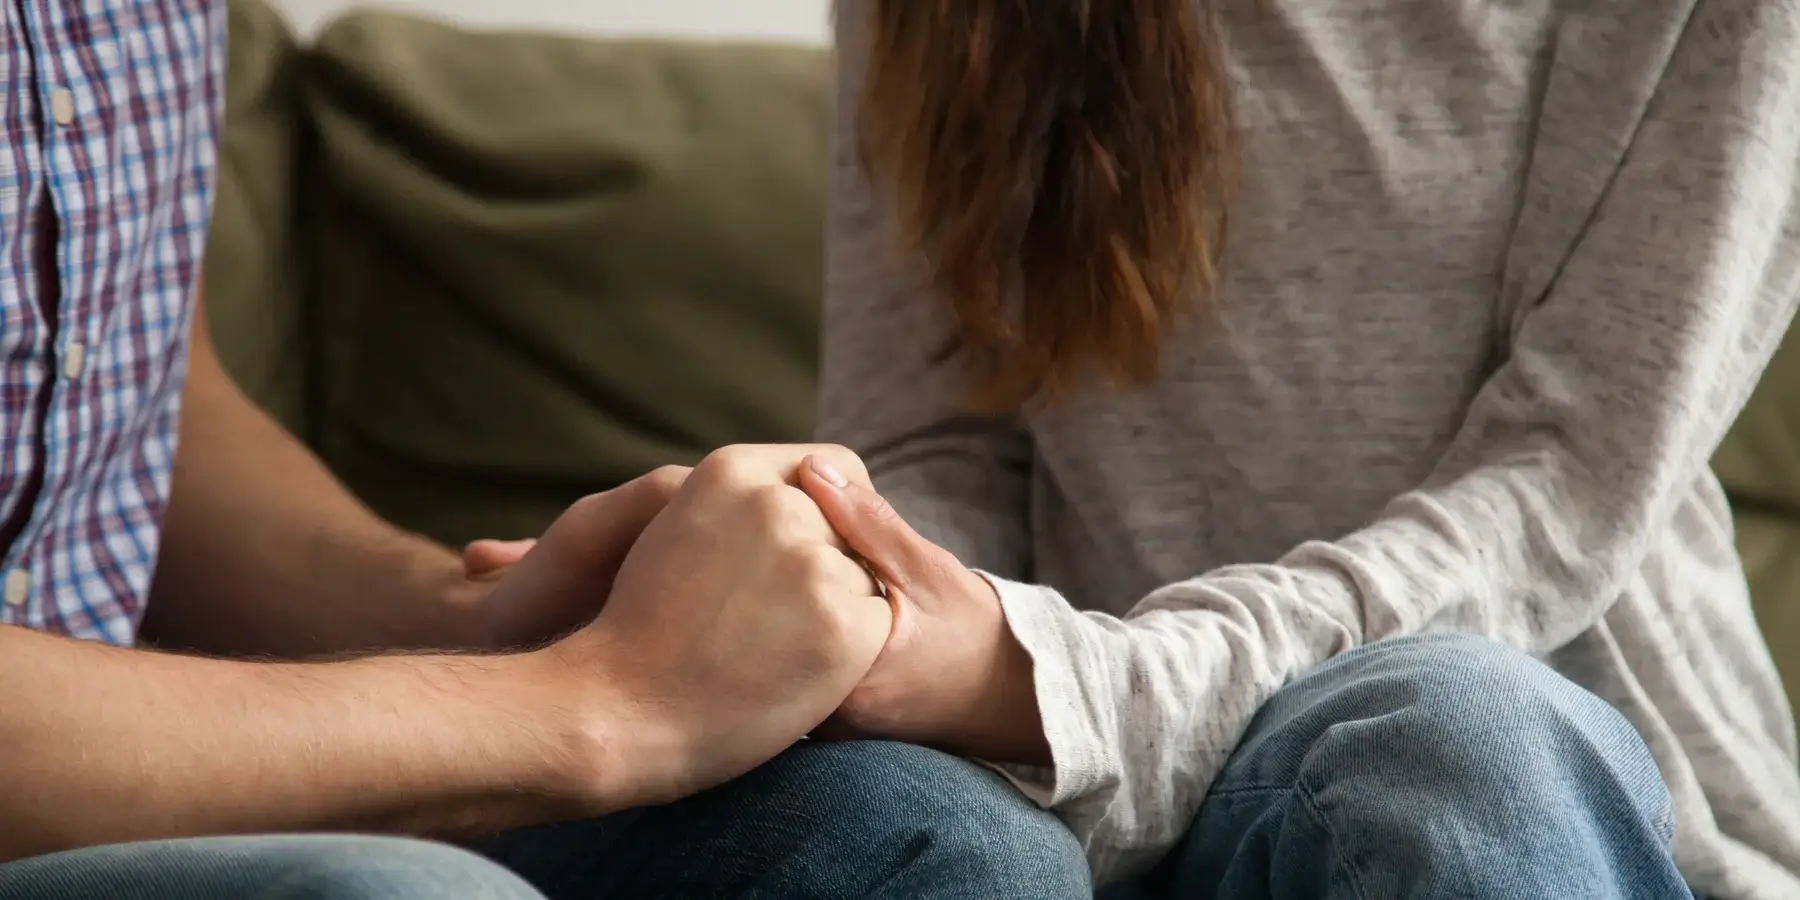 How Does Having Lyme Disease Affect Your Relationships?